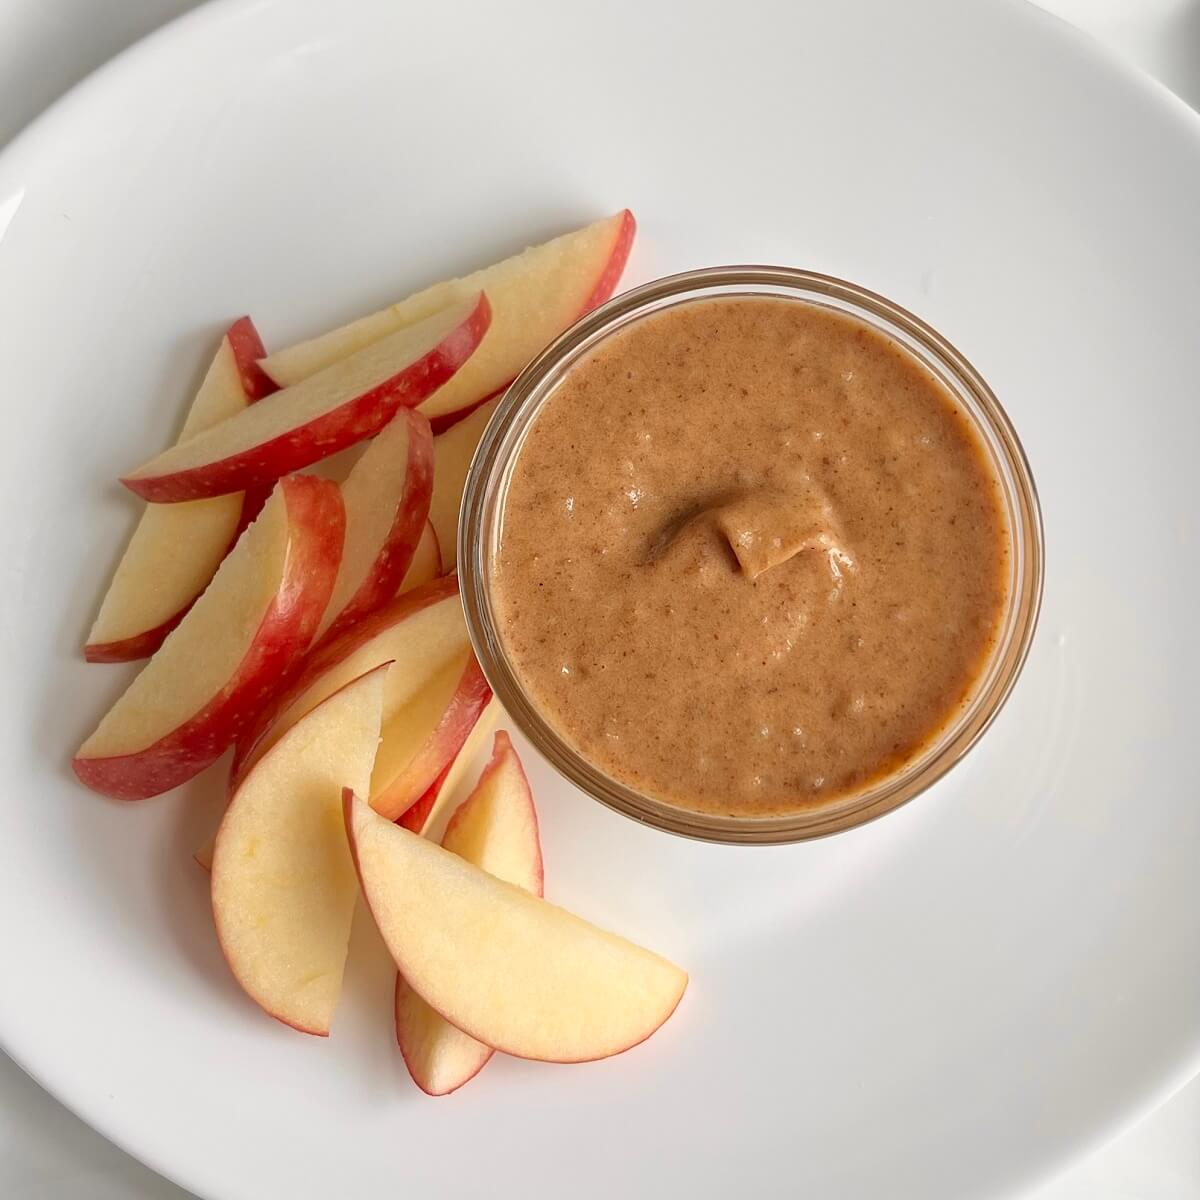 A dish of date caramel sauce next to some sliced apples.